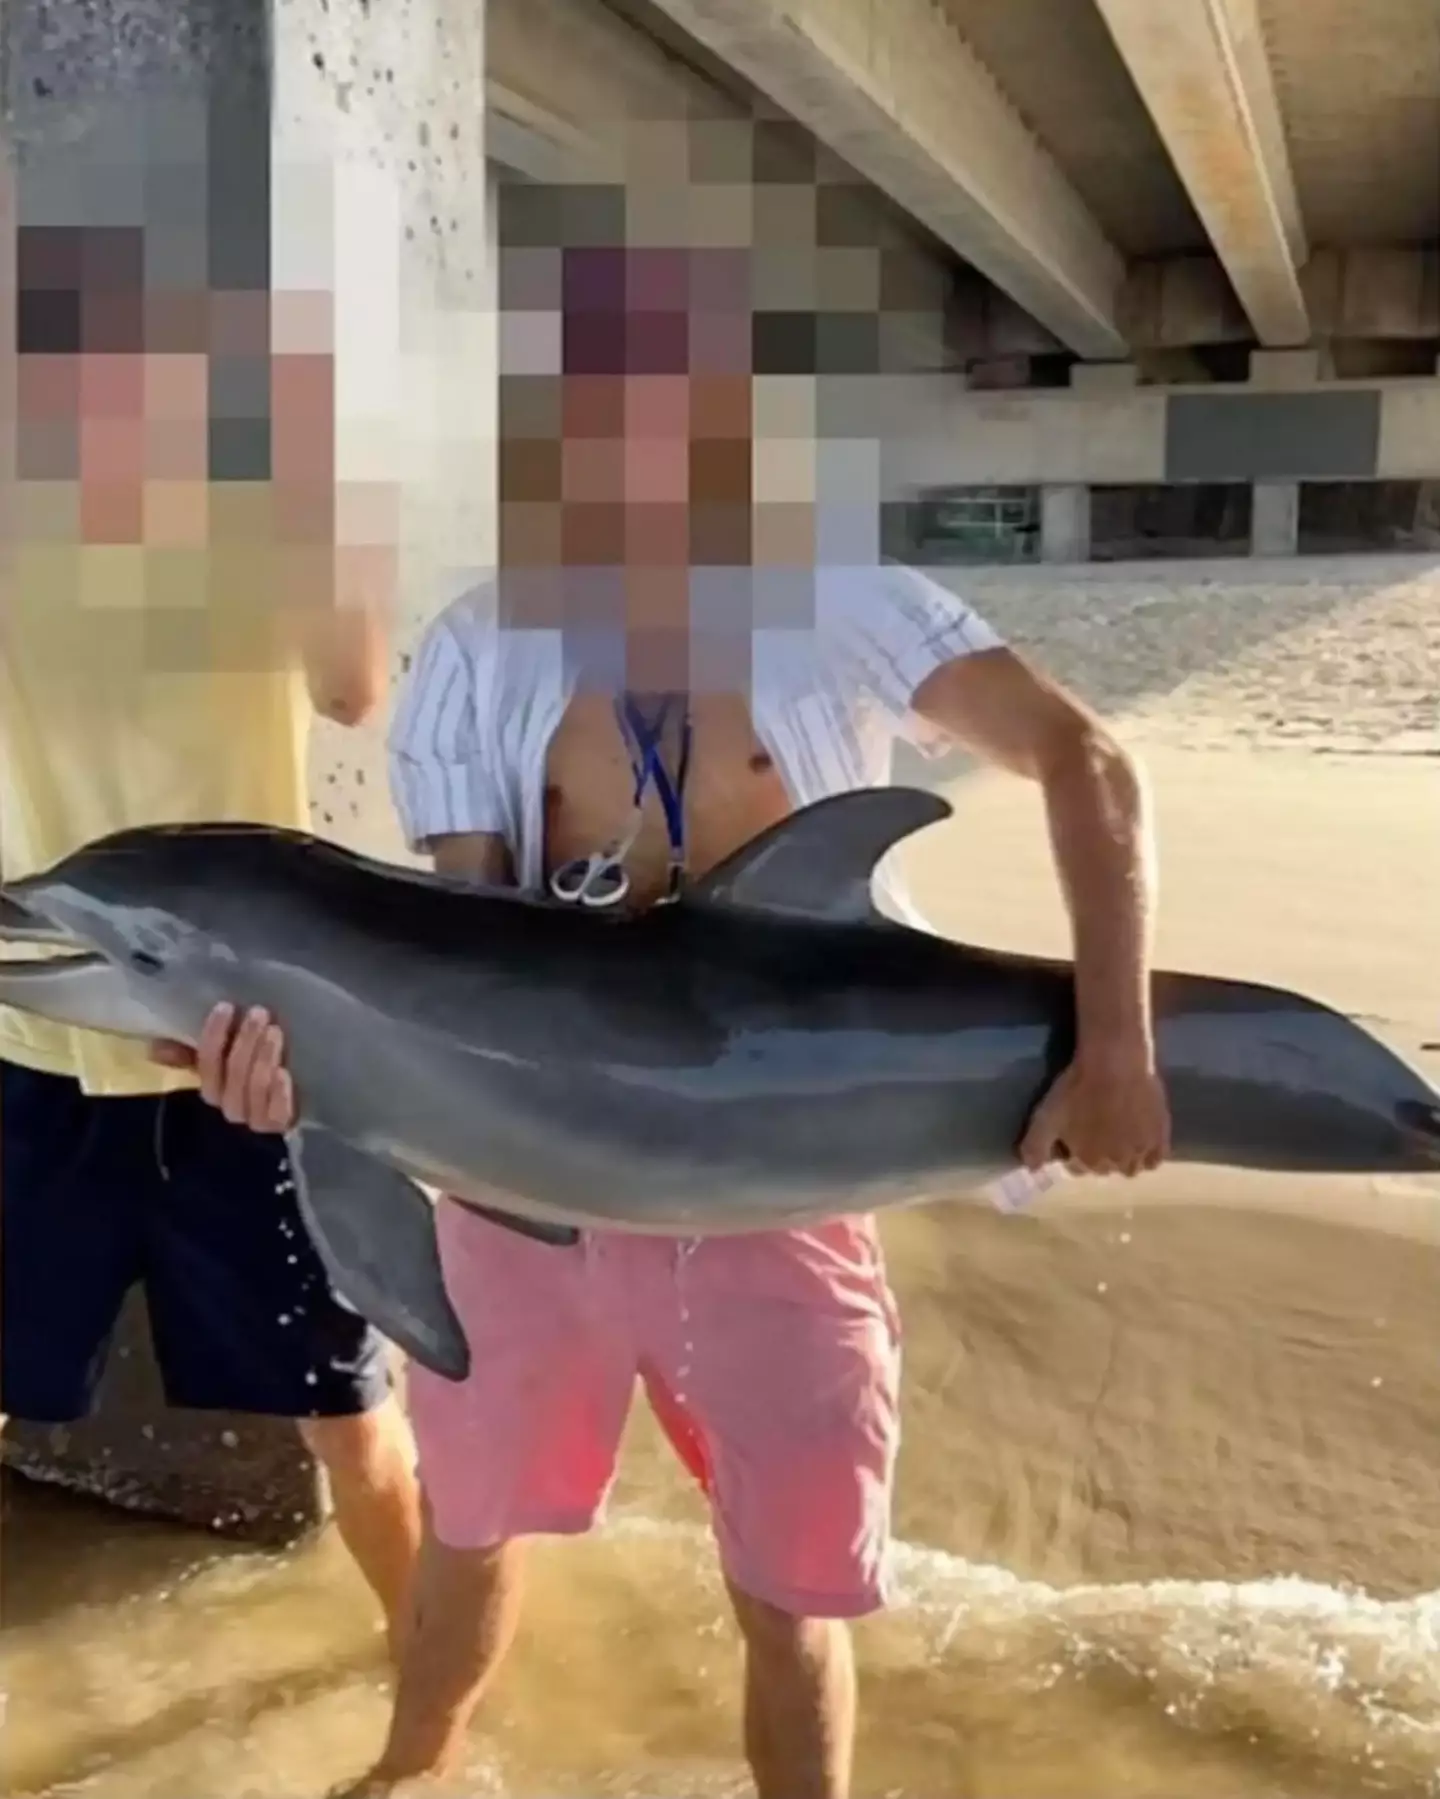 The teen posted a photo on Instagram holding the dolphin.